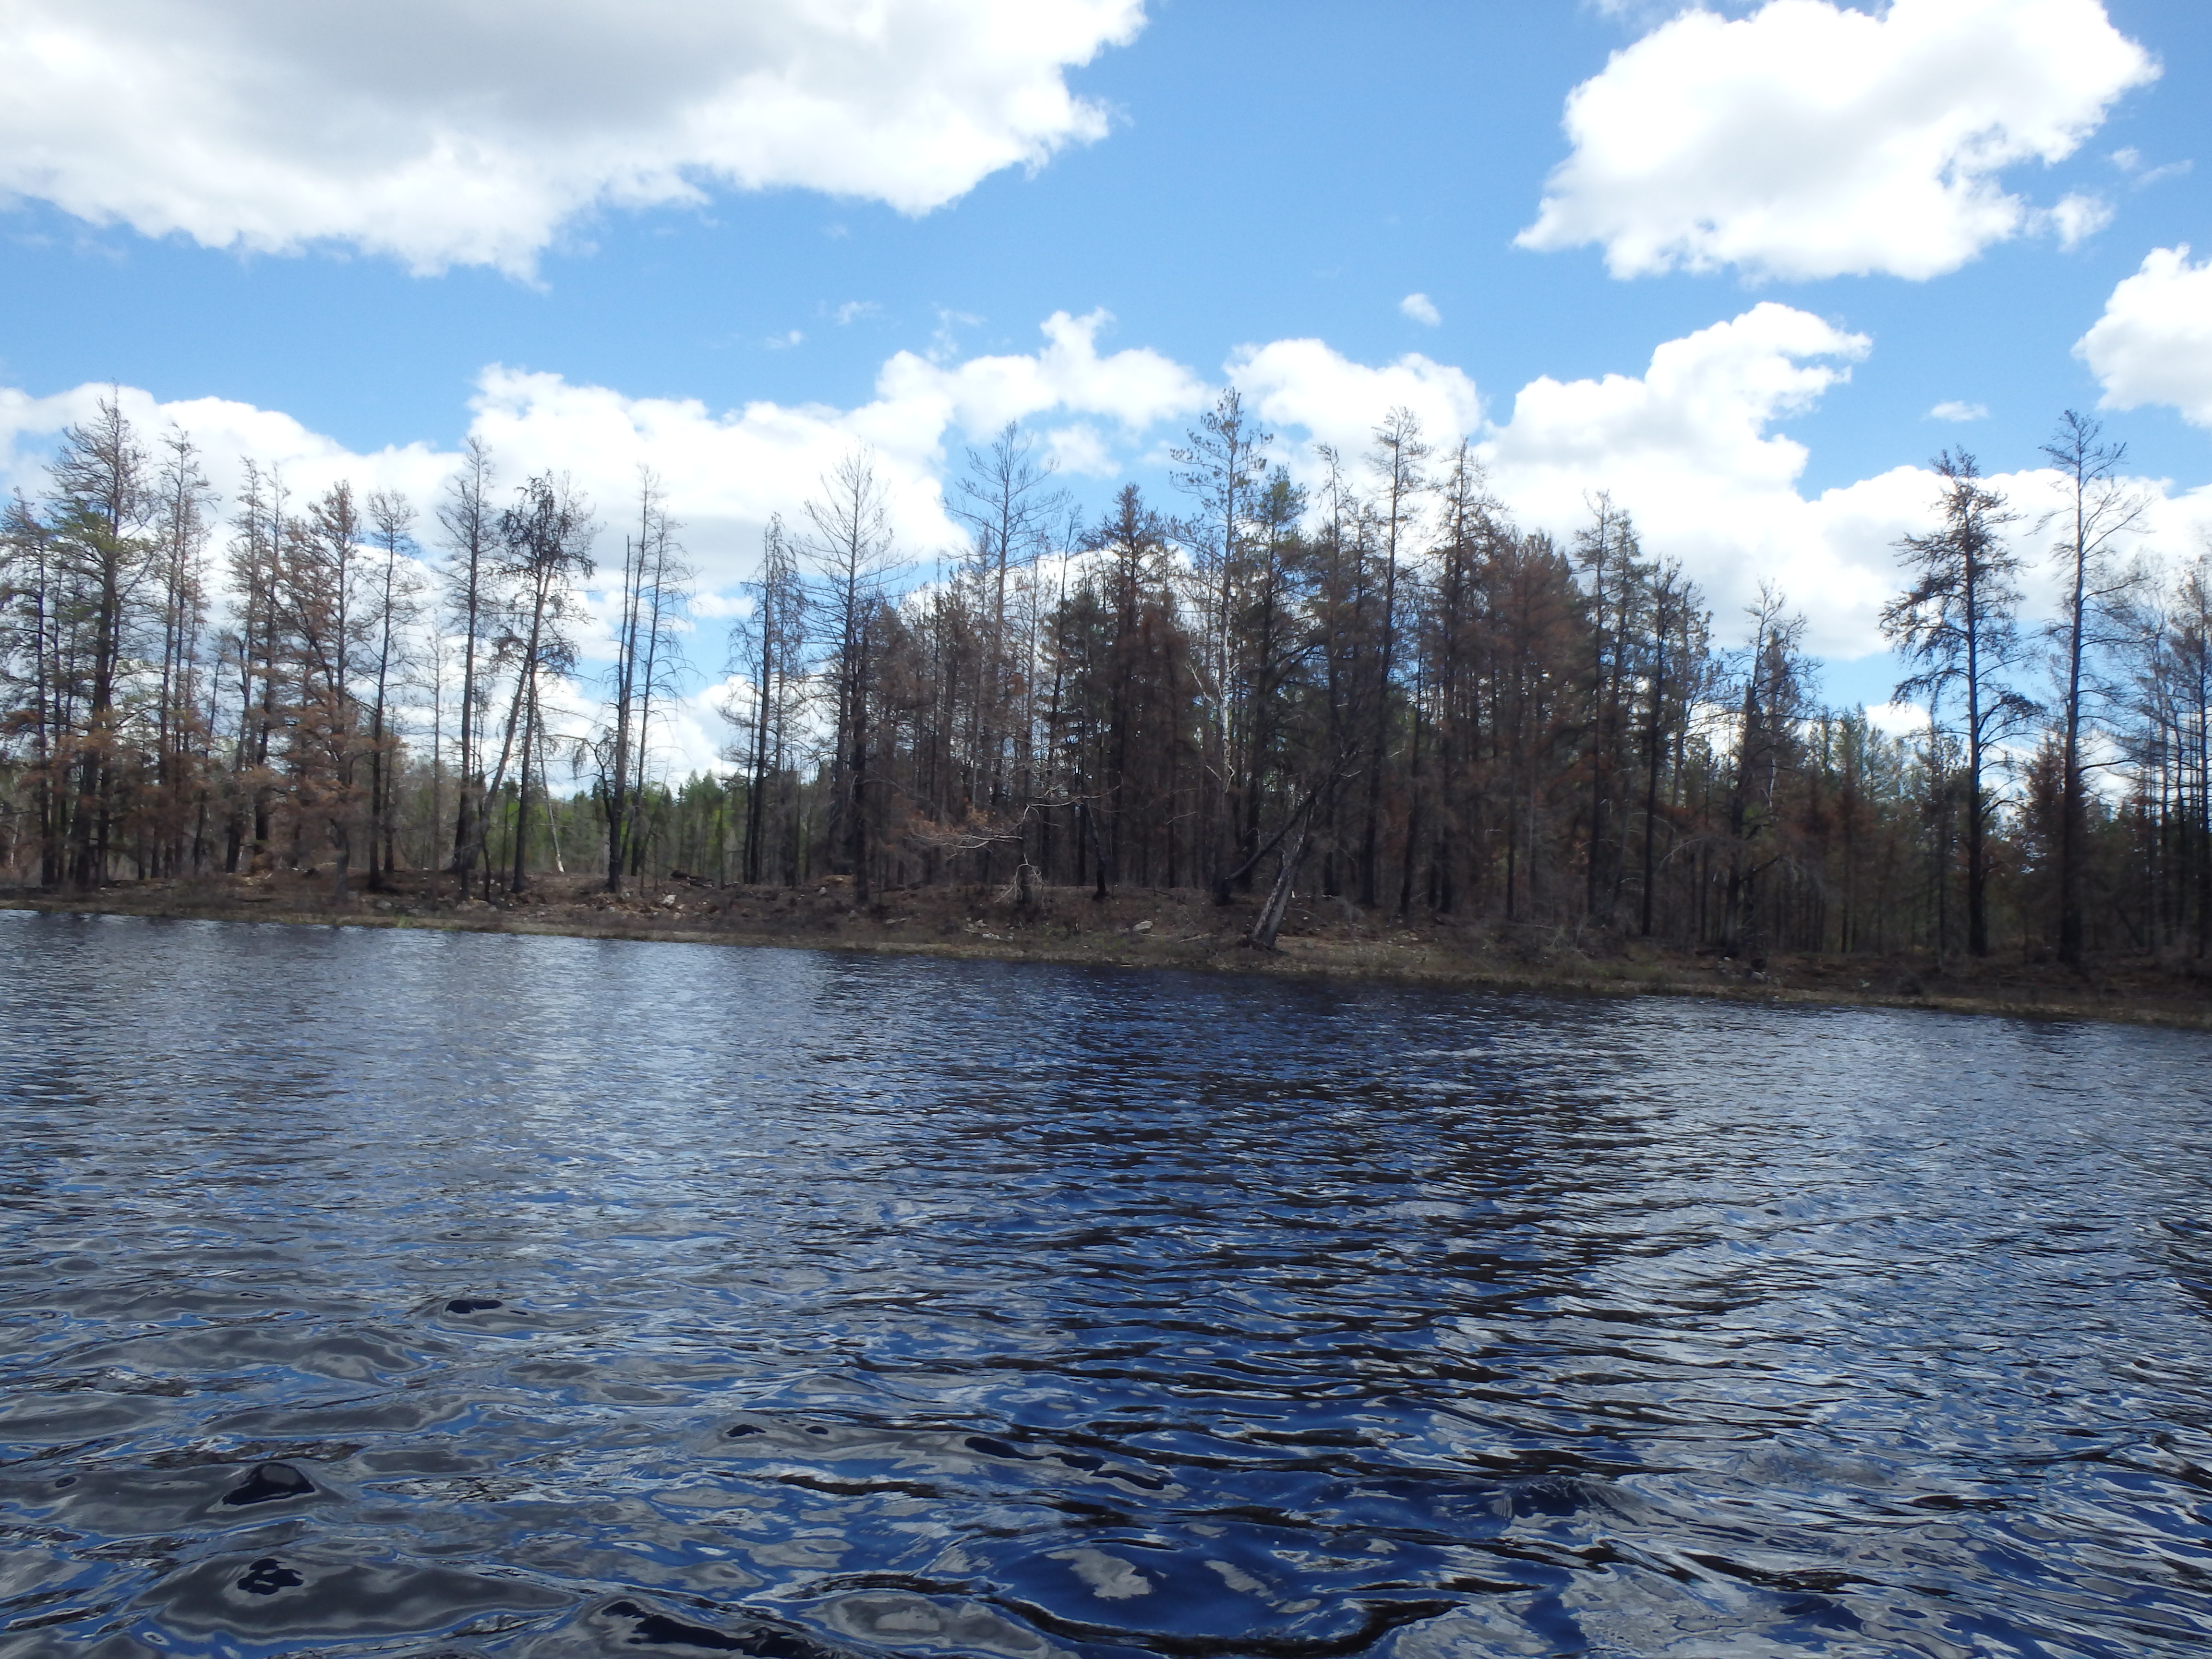 Burned pine forest with lake in foreground.